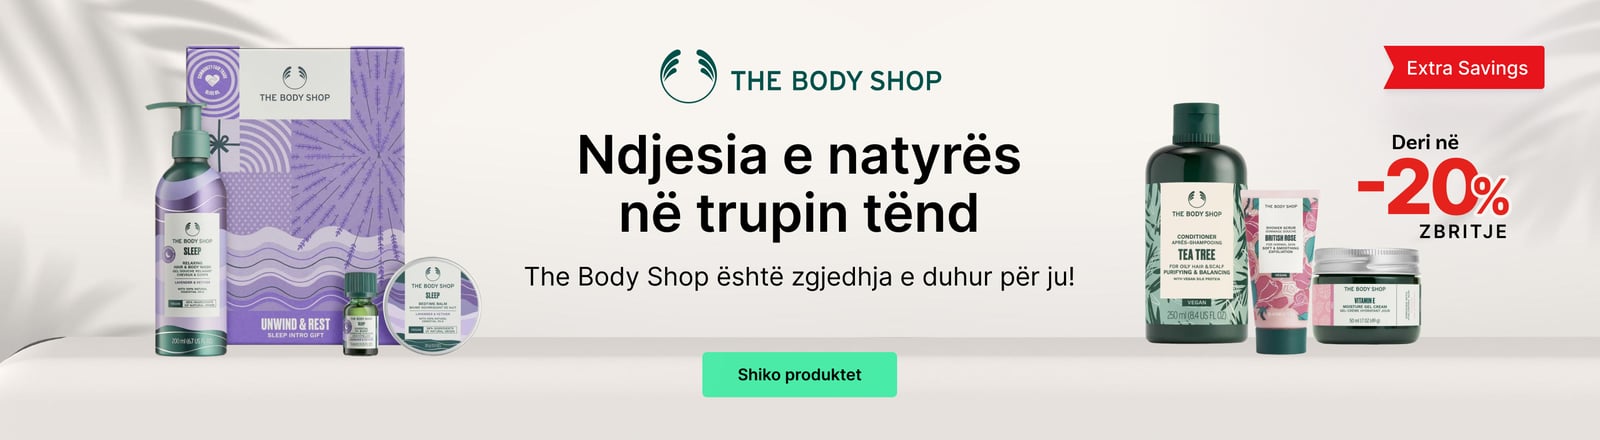 Banner-the-body-shop-web